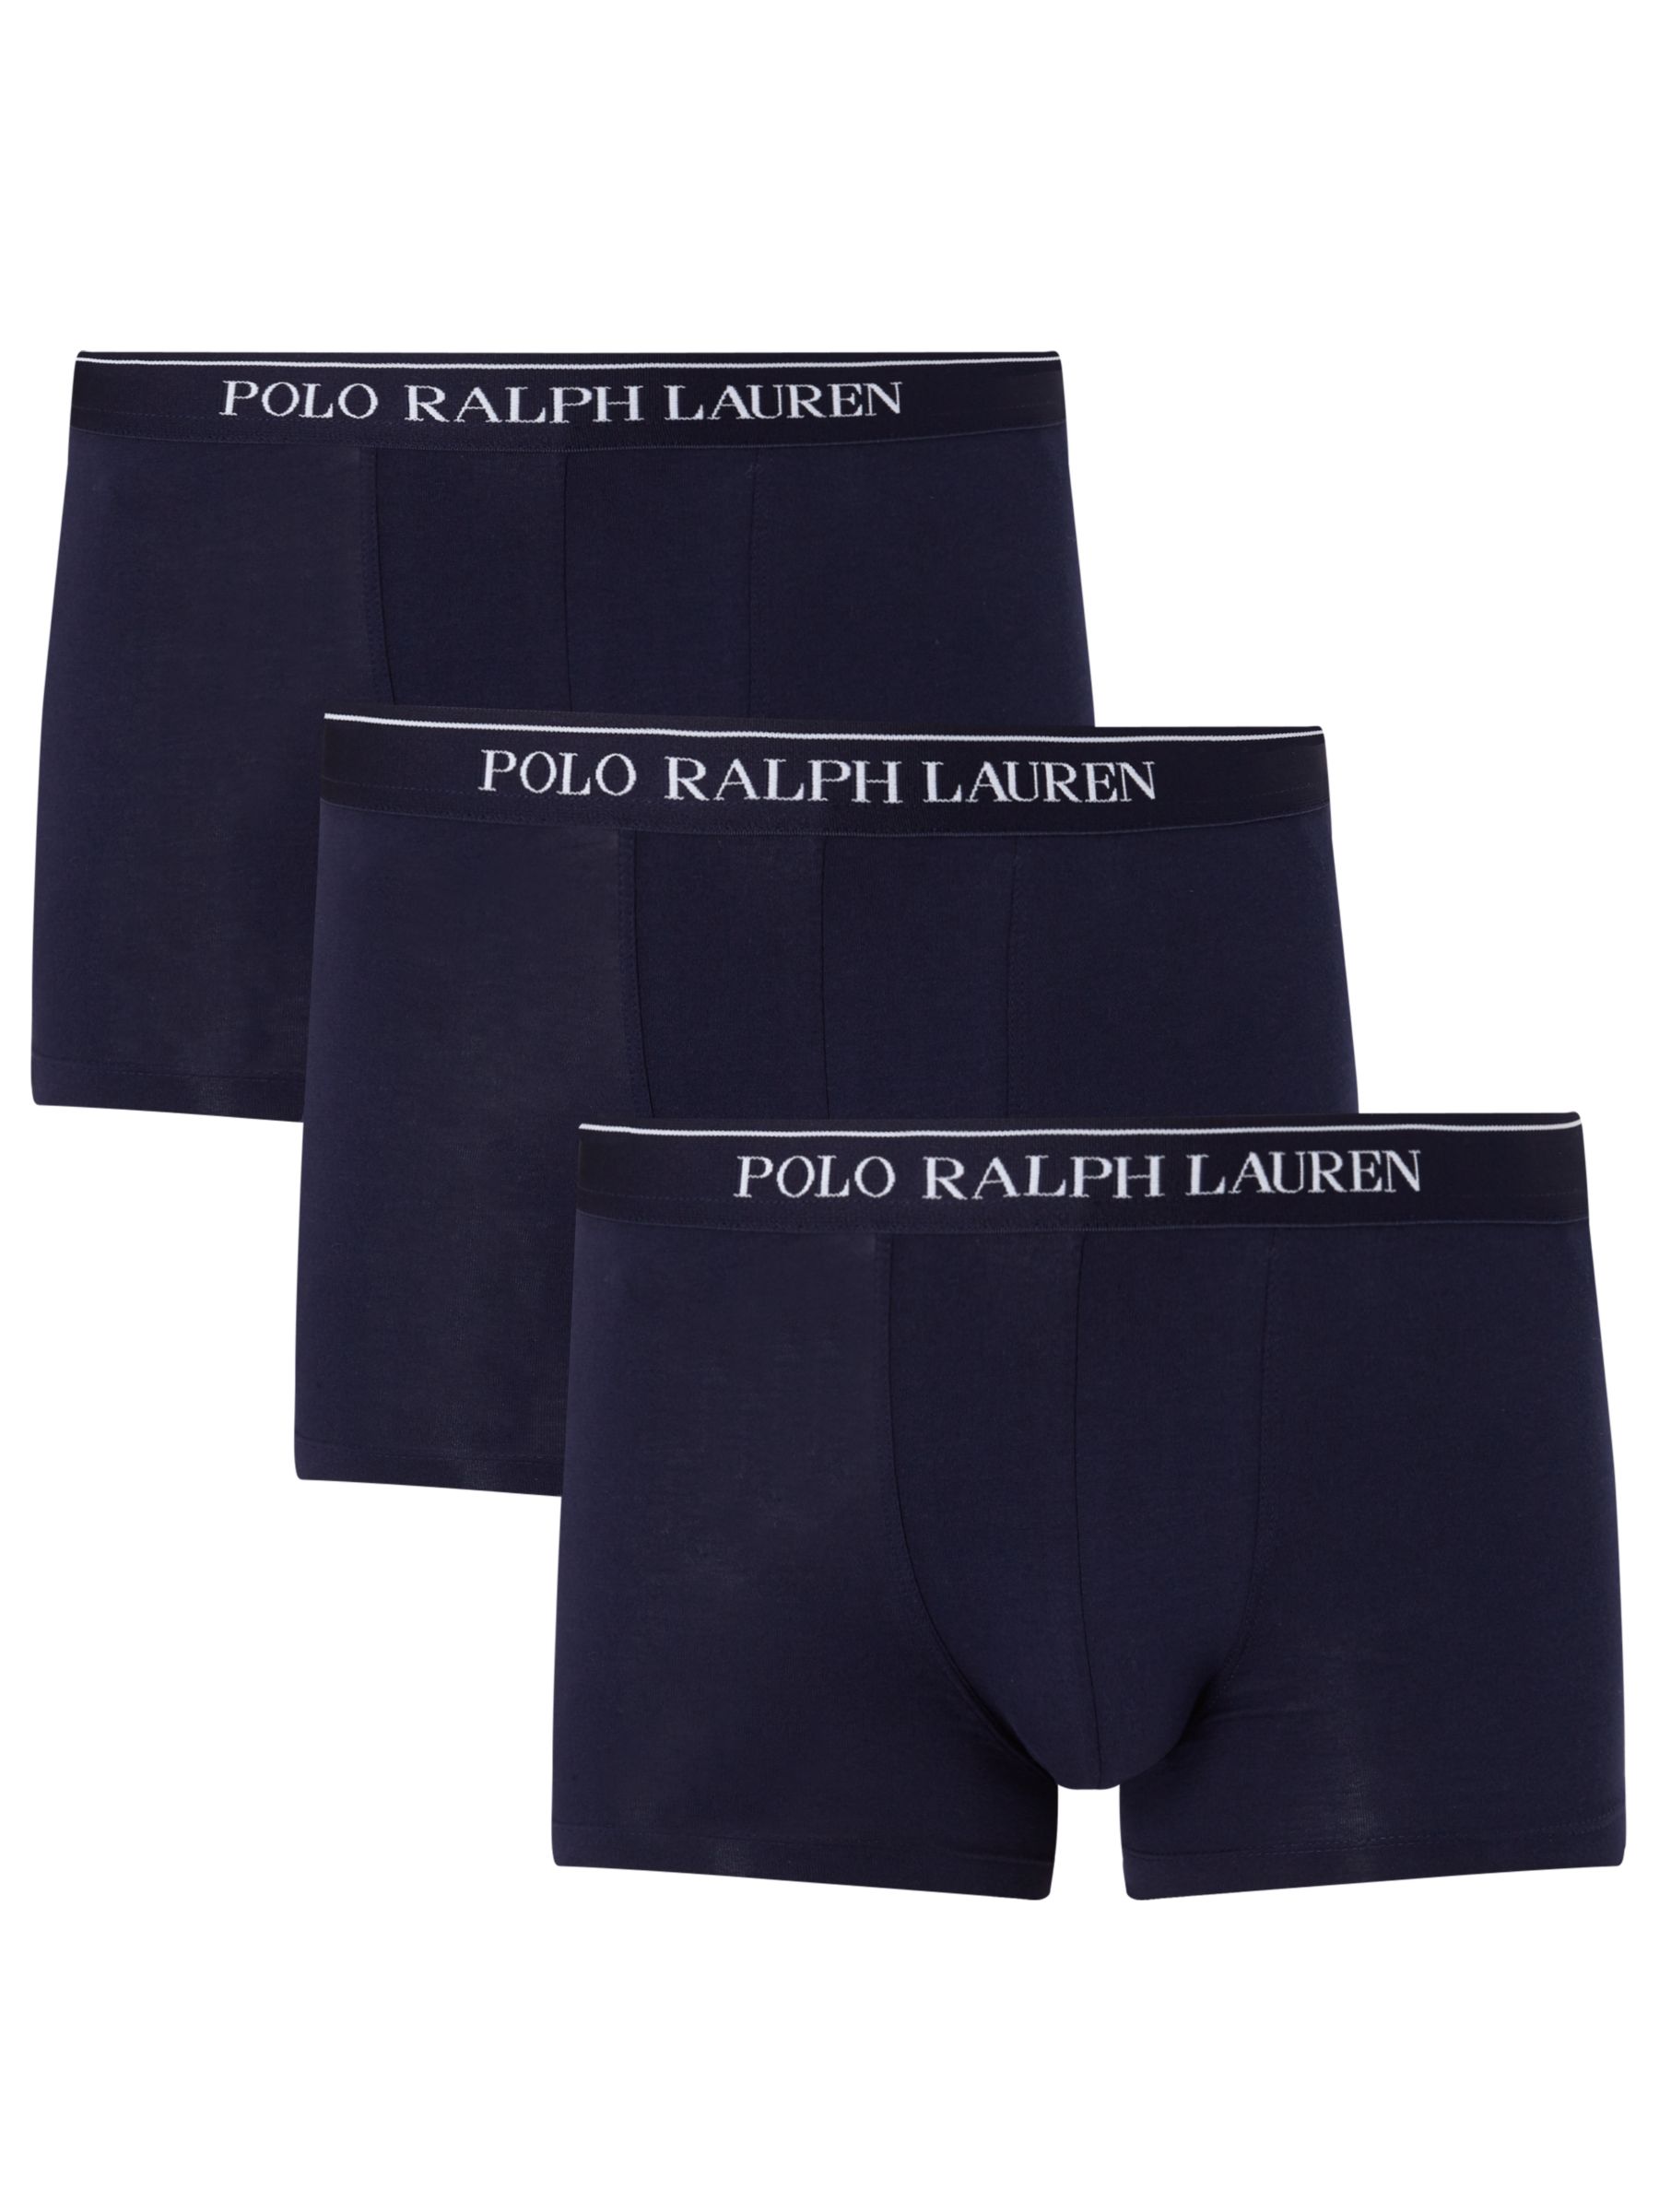 Polo Ralph Lauren Stretch Cotton Trunks, Pack of 3, Navy, S